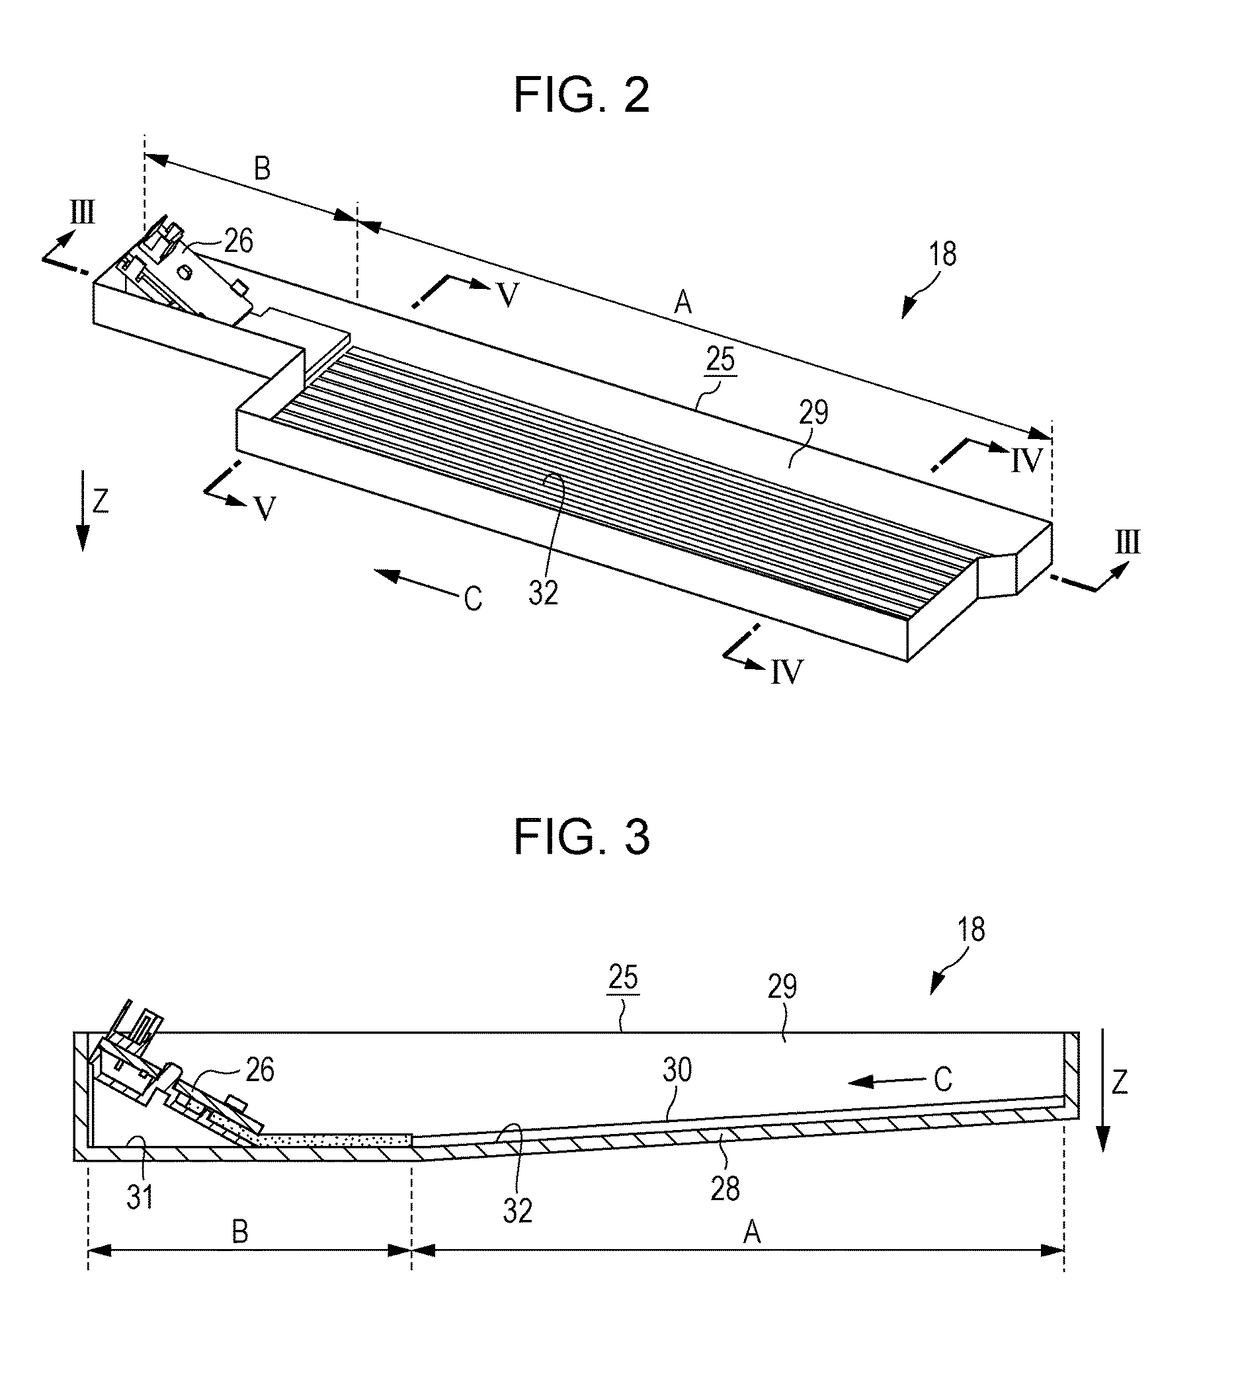 Liquid ejecting apparatus with ink receiving tray and detector